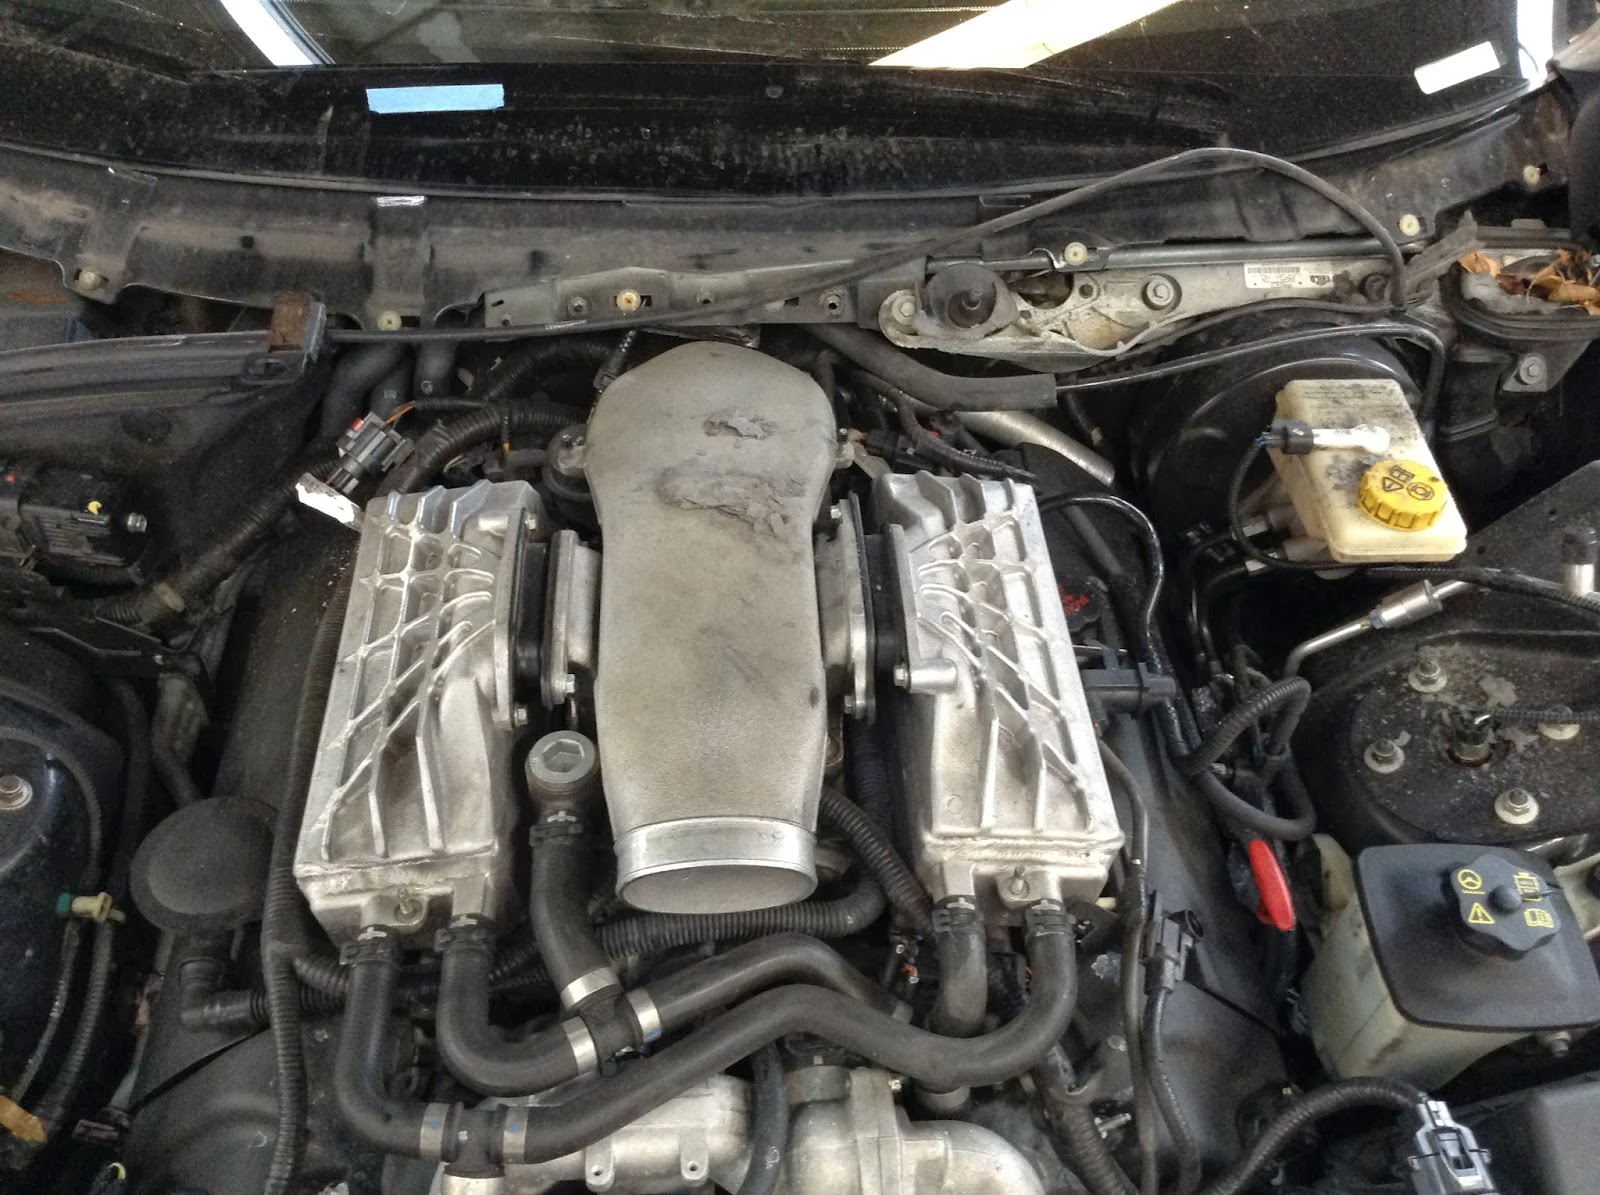 S-type supercharger removal (with pics) - Jaguar Forums ... bmw wiring diagram system 12 0 